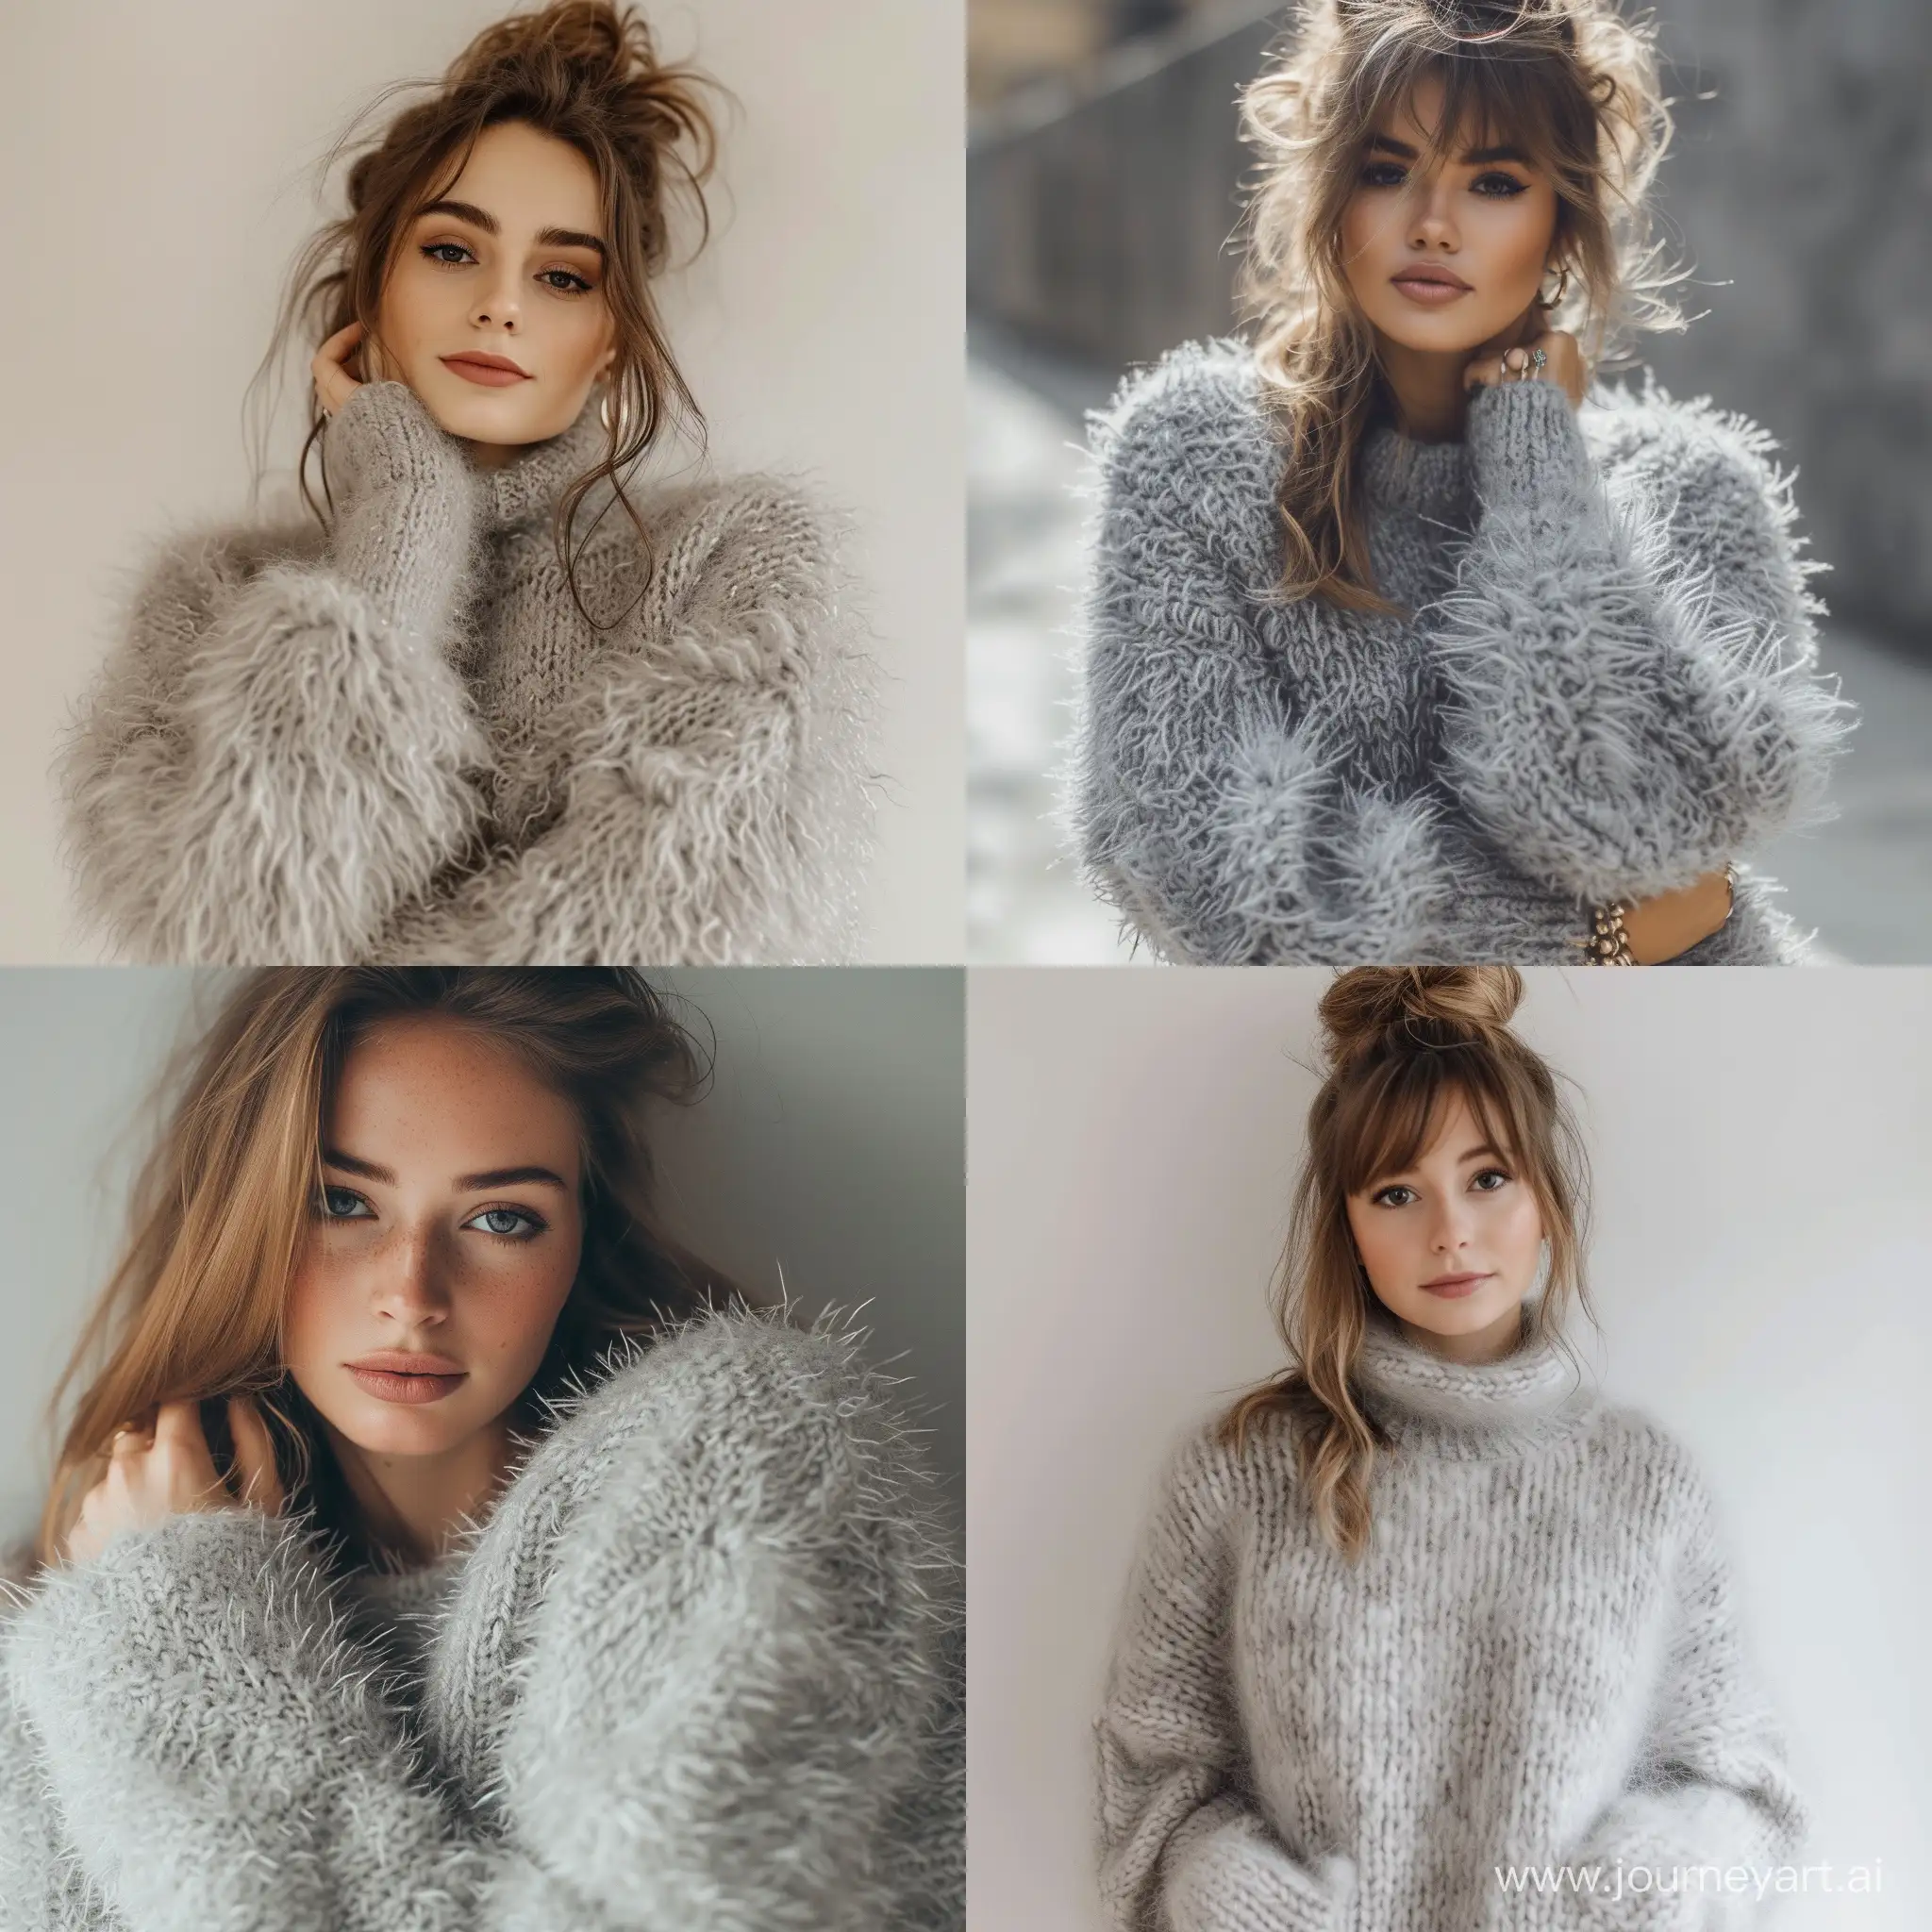 Fashionable-Young-Woman-in-Grey-Chunky-Knit-Mohair-Sweater